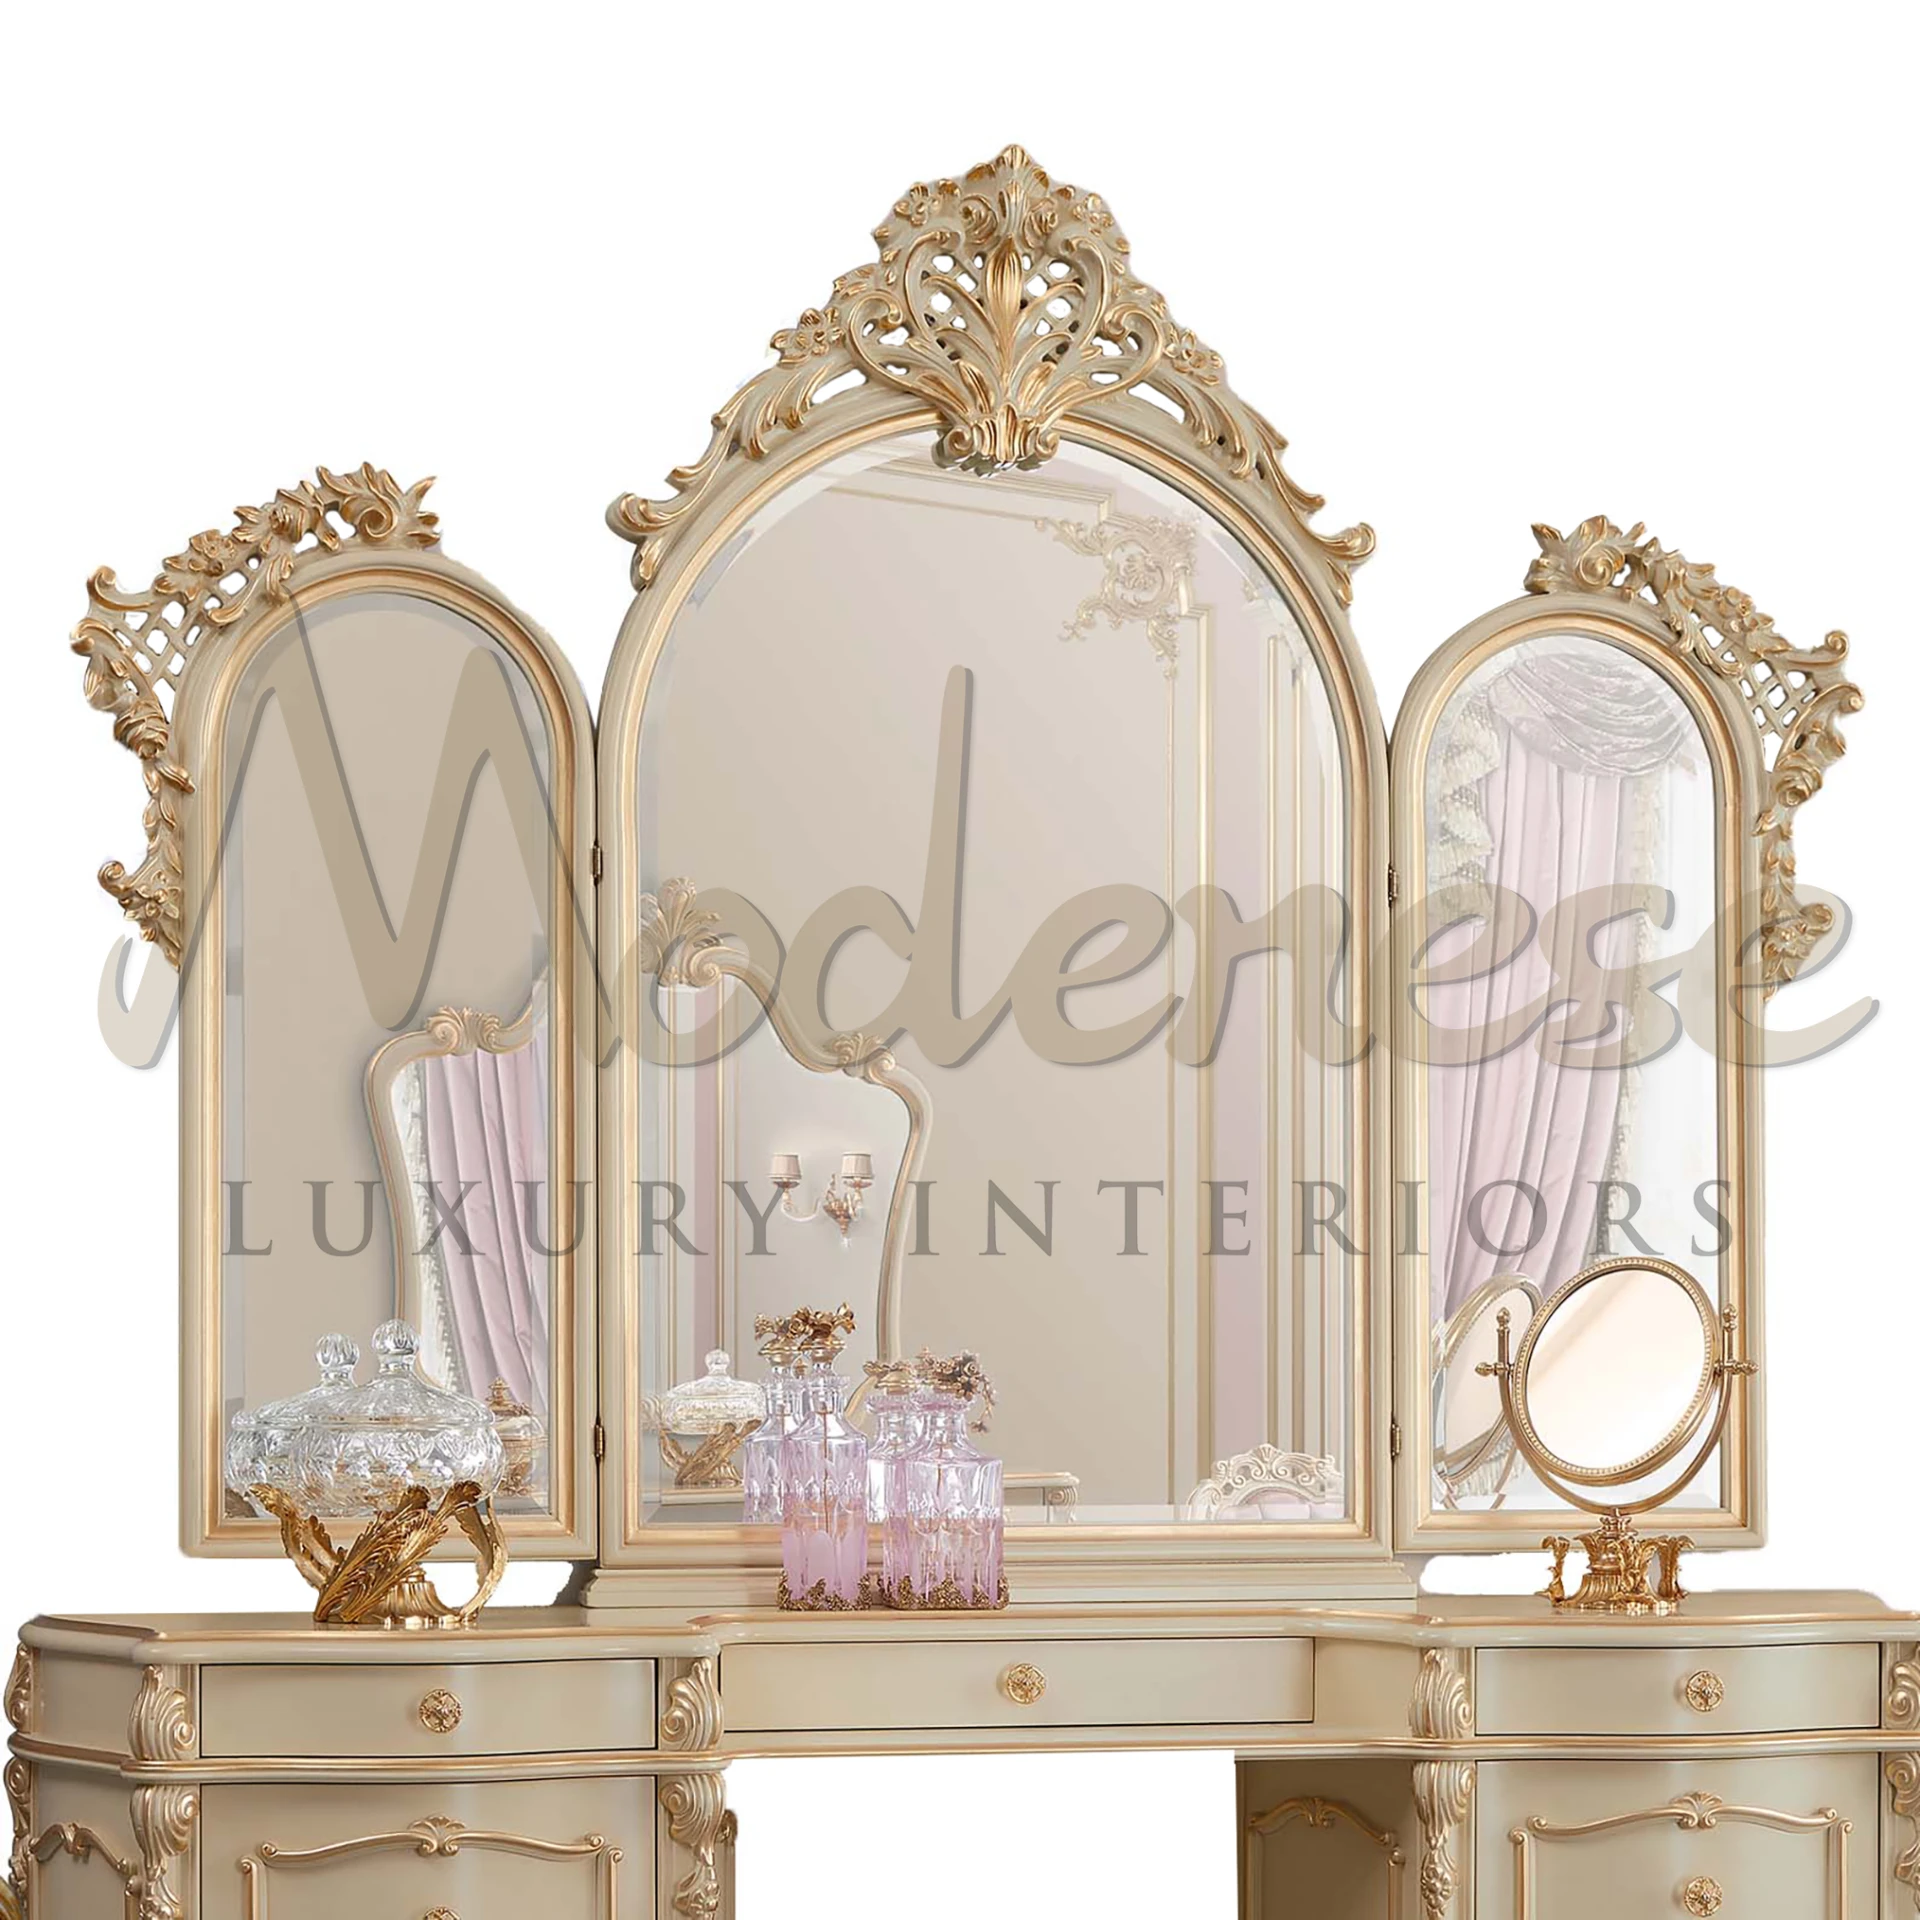 Stylish Ornate Gold Wall Mirror by Modenese, perfect for making a bold statement in luxury interior design.